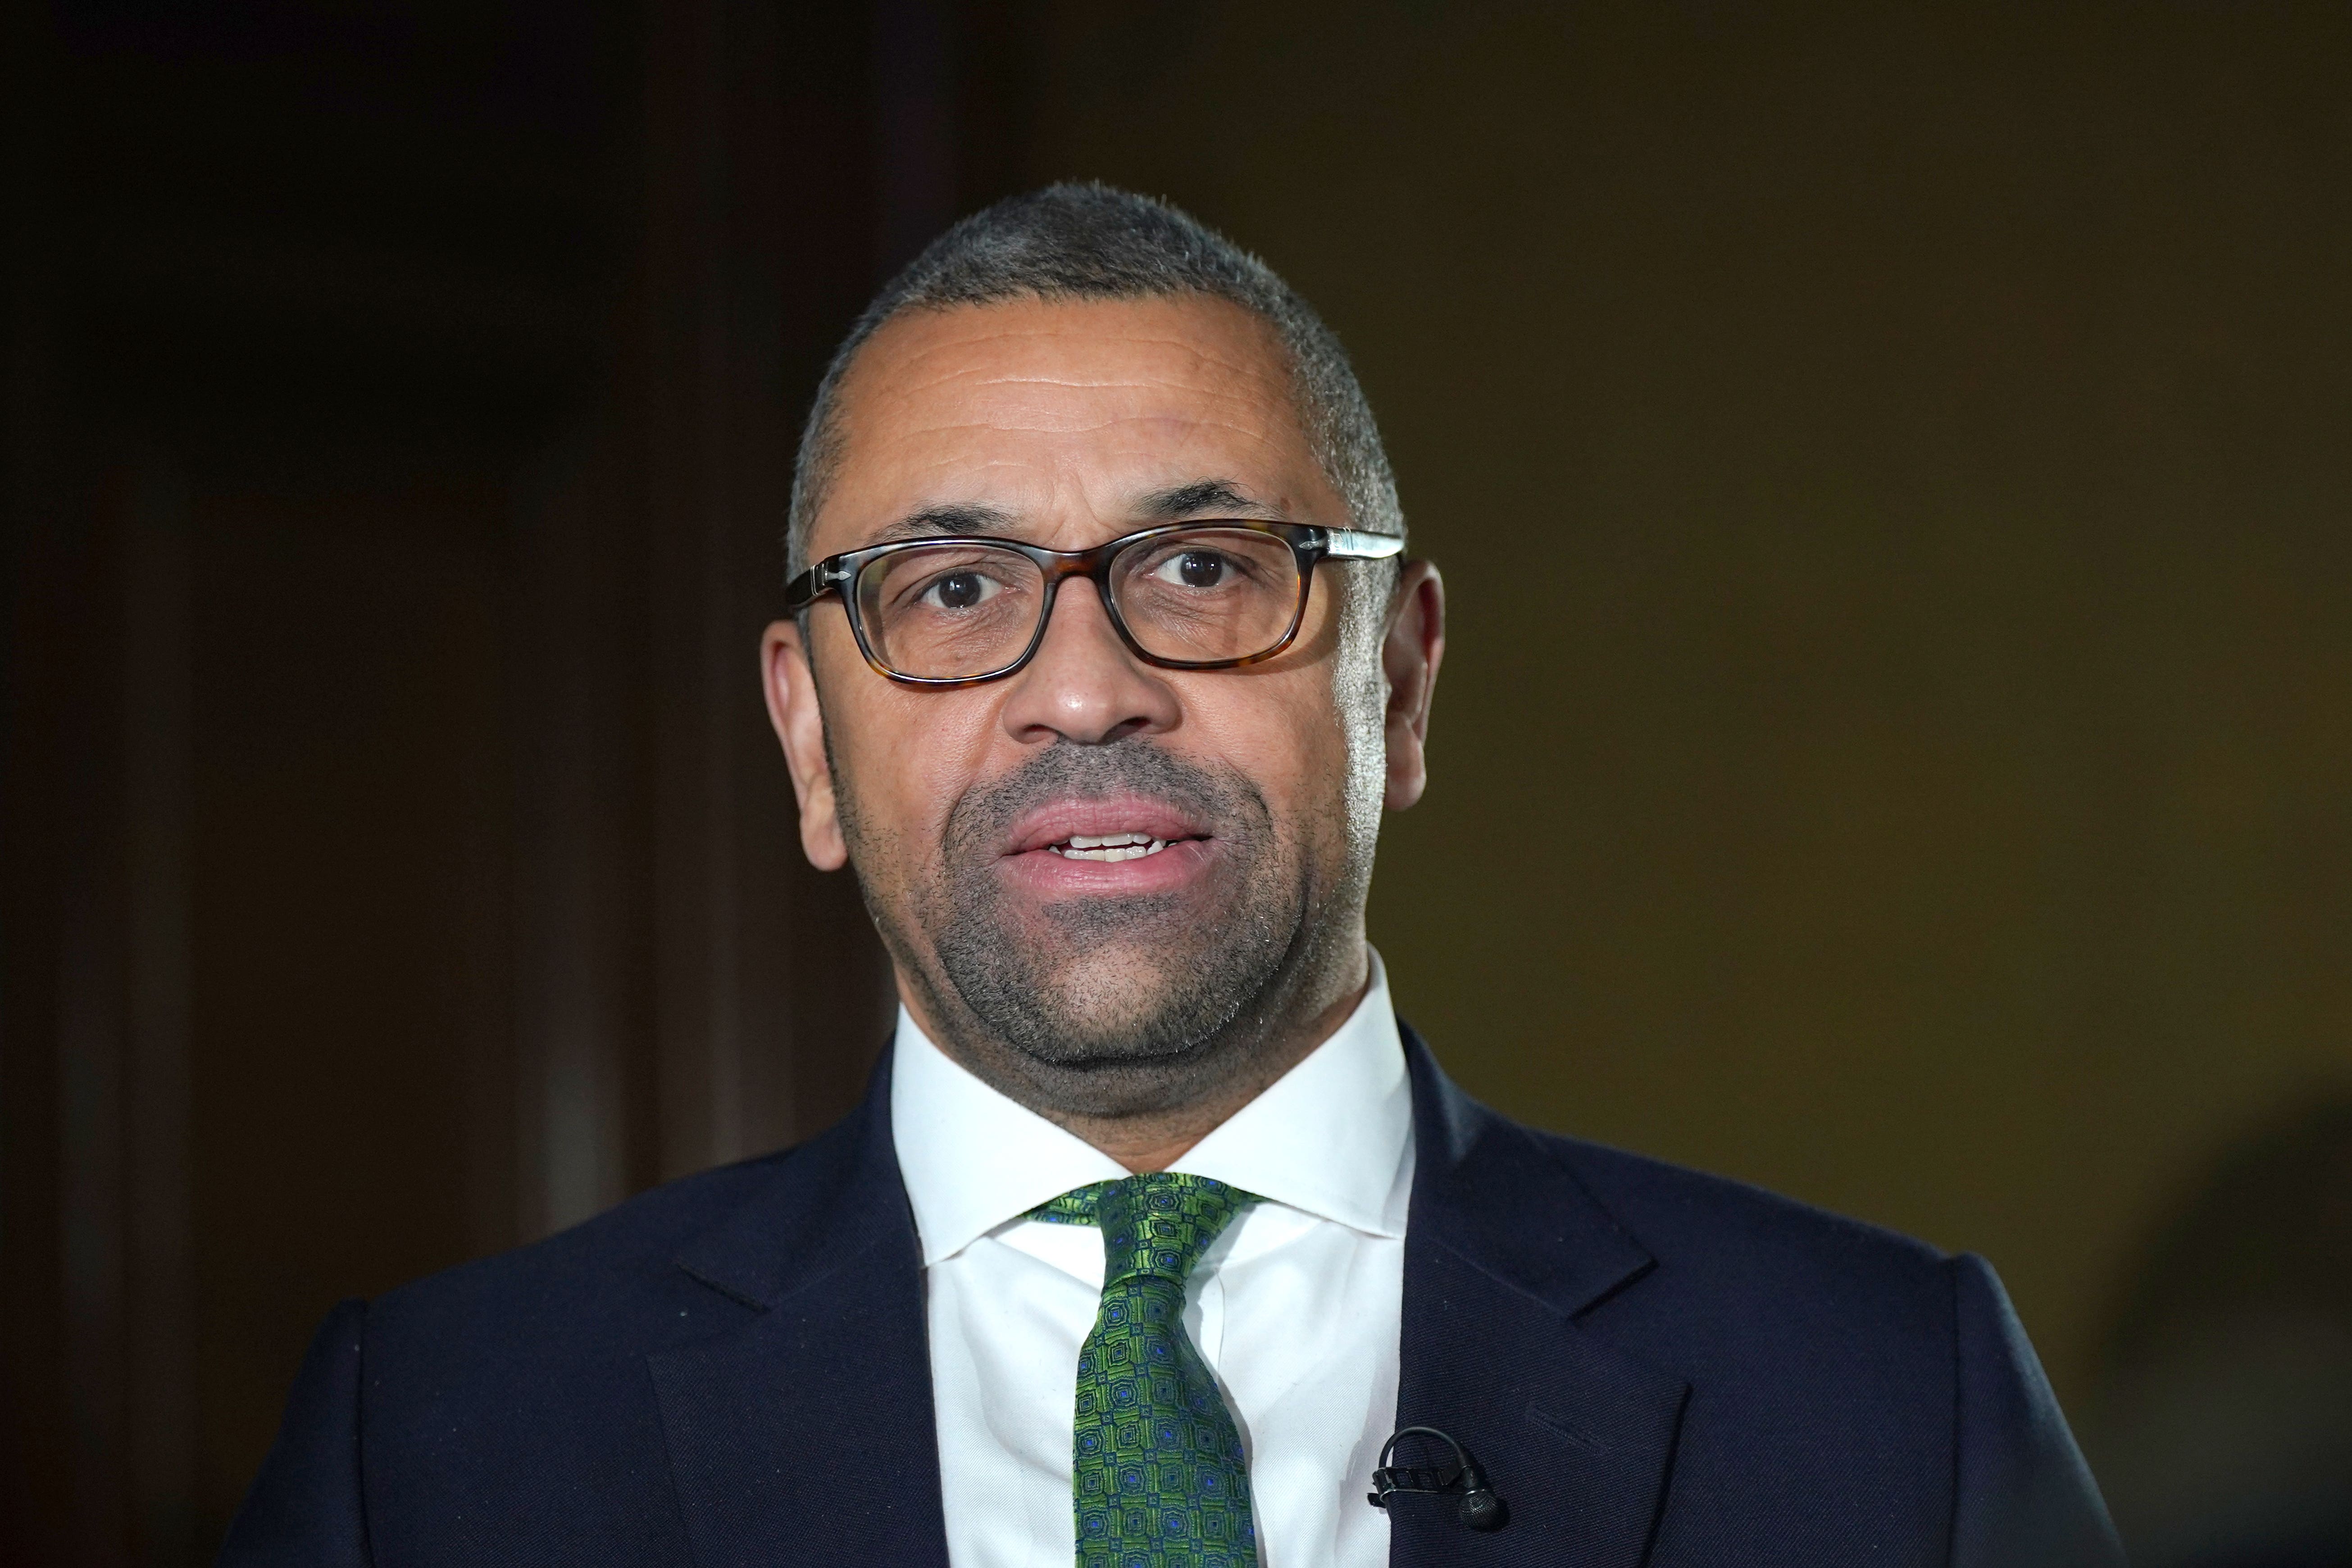 James Cleverly will say the UK must engage directly with China in order to promote stability